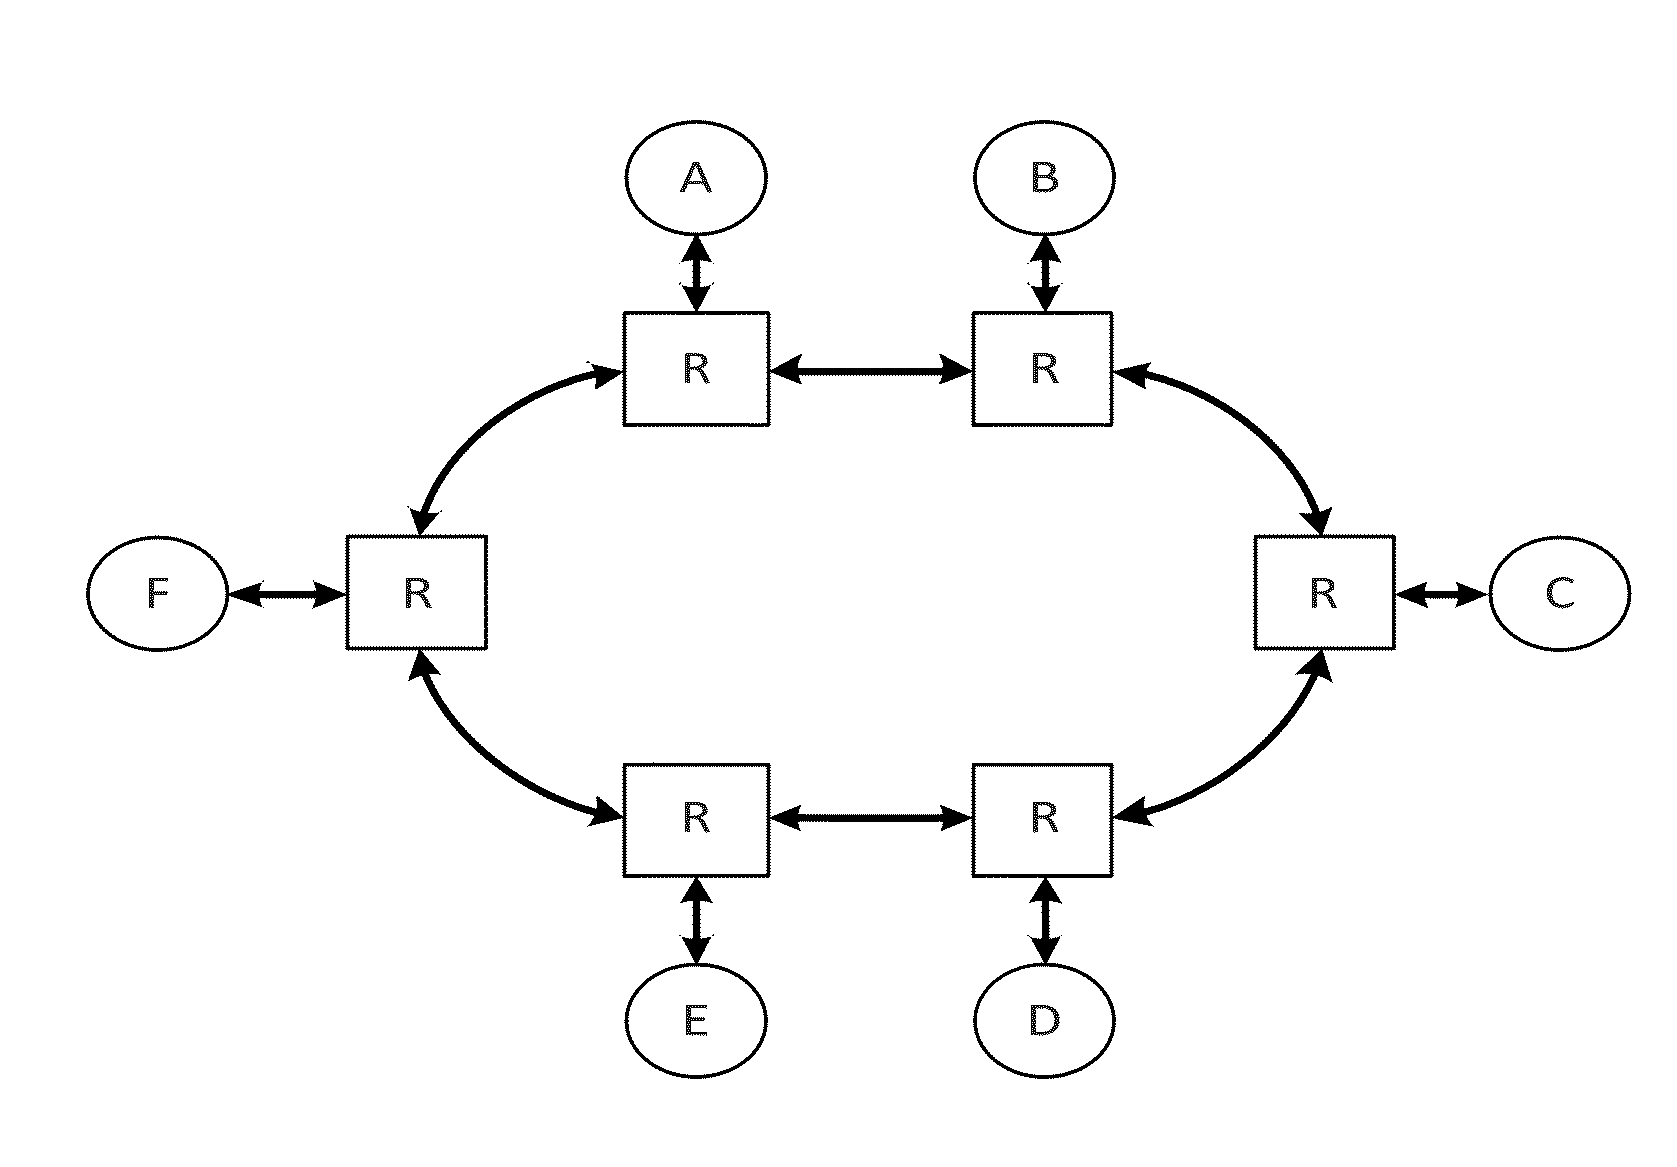 QOS in a system with end-to-end flow control and QOS aware buffer allocation